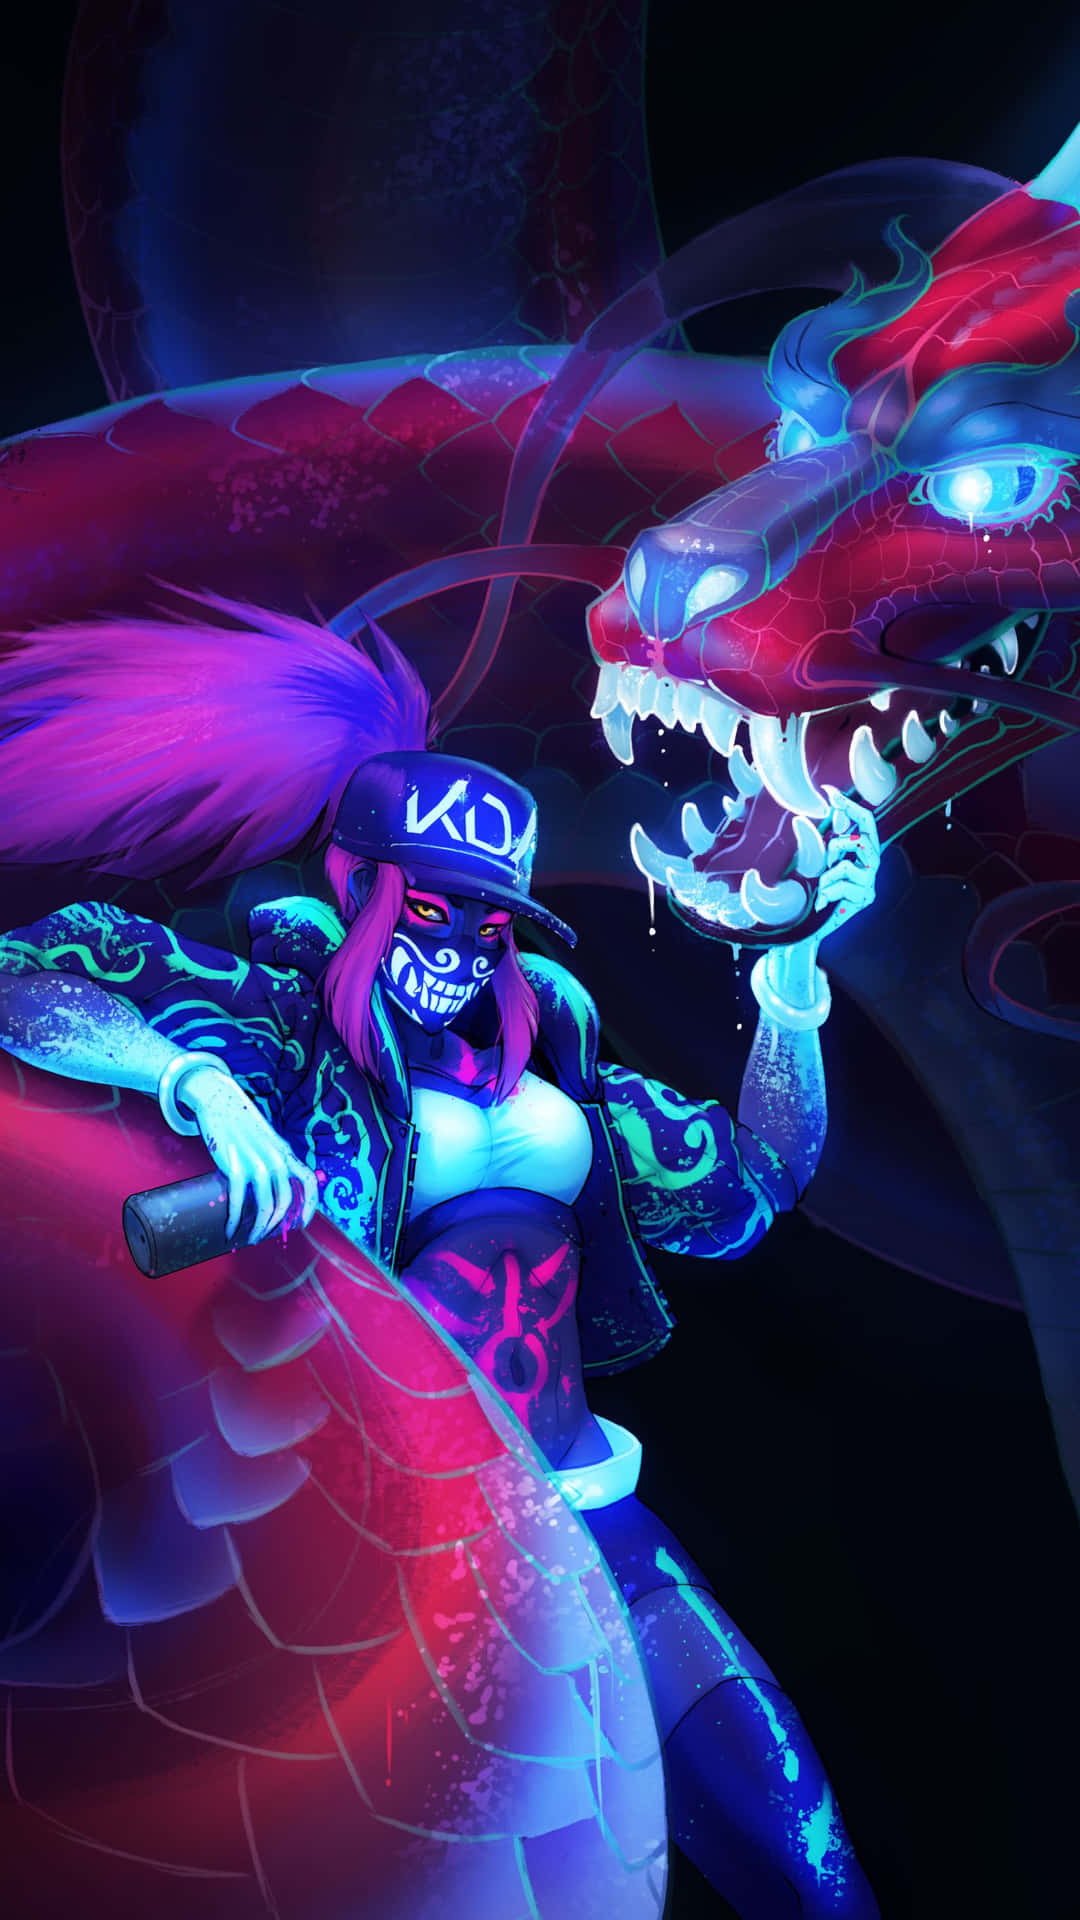 An Off-Screen Look at the 'League Of Legends' Phone Wallpaper